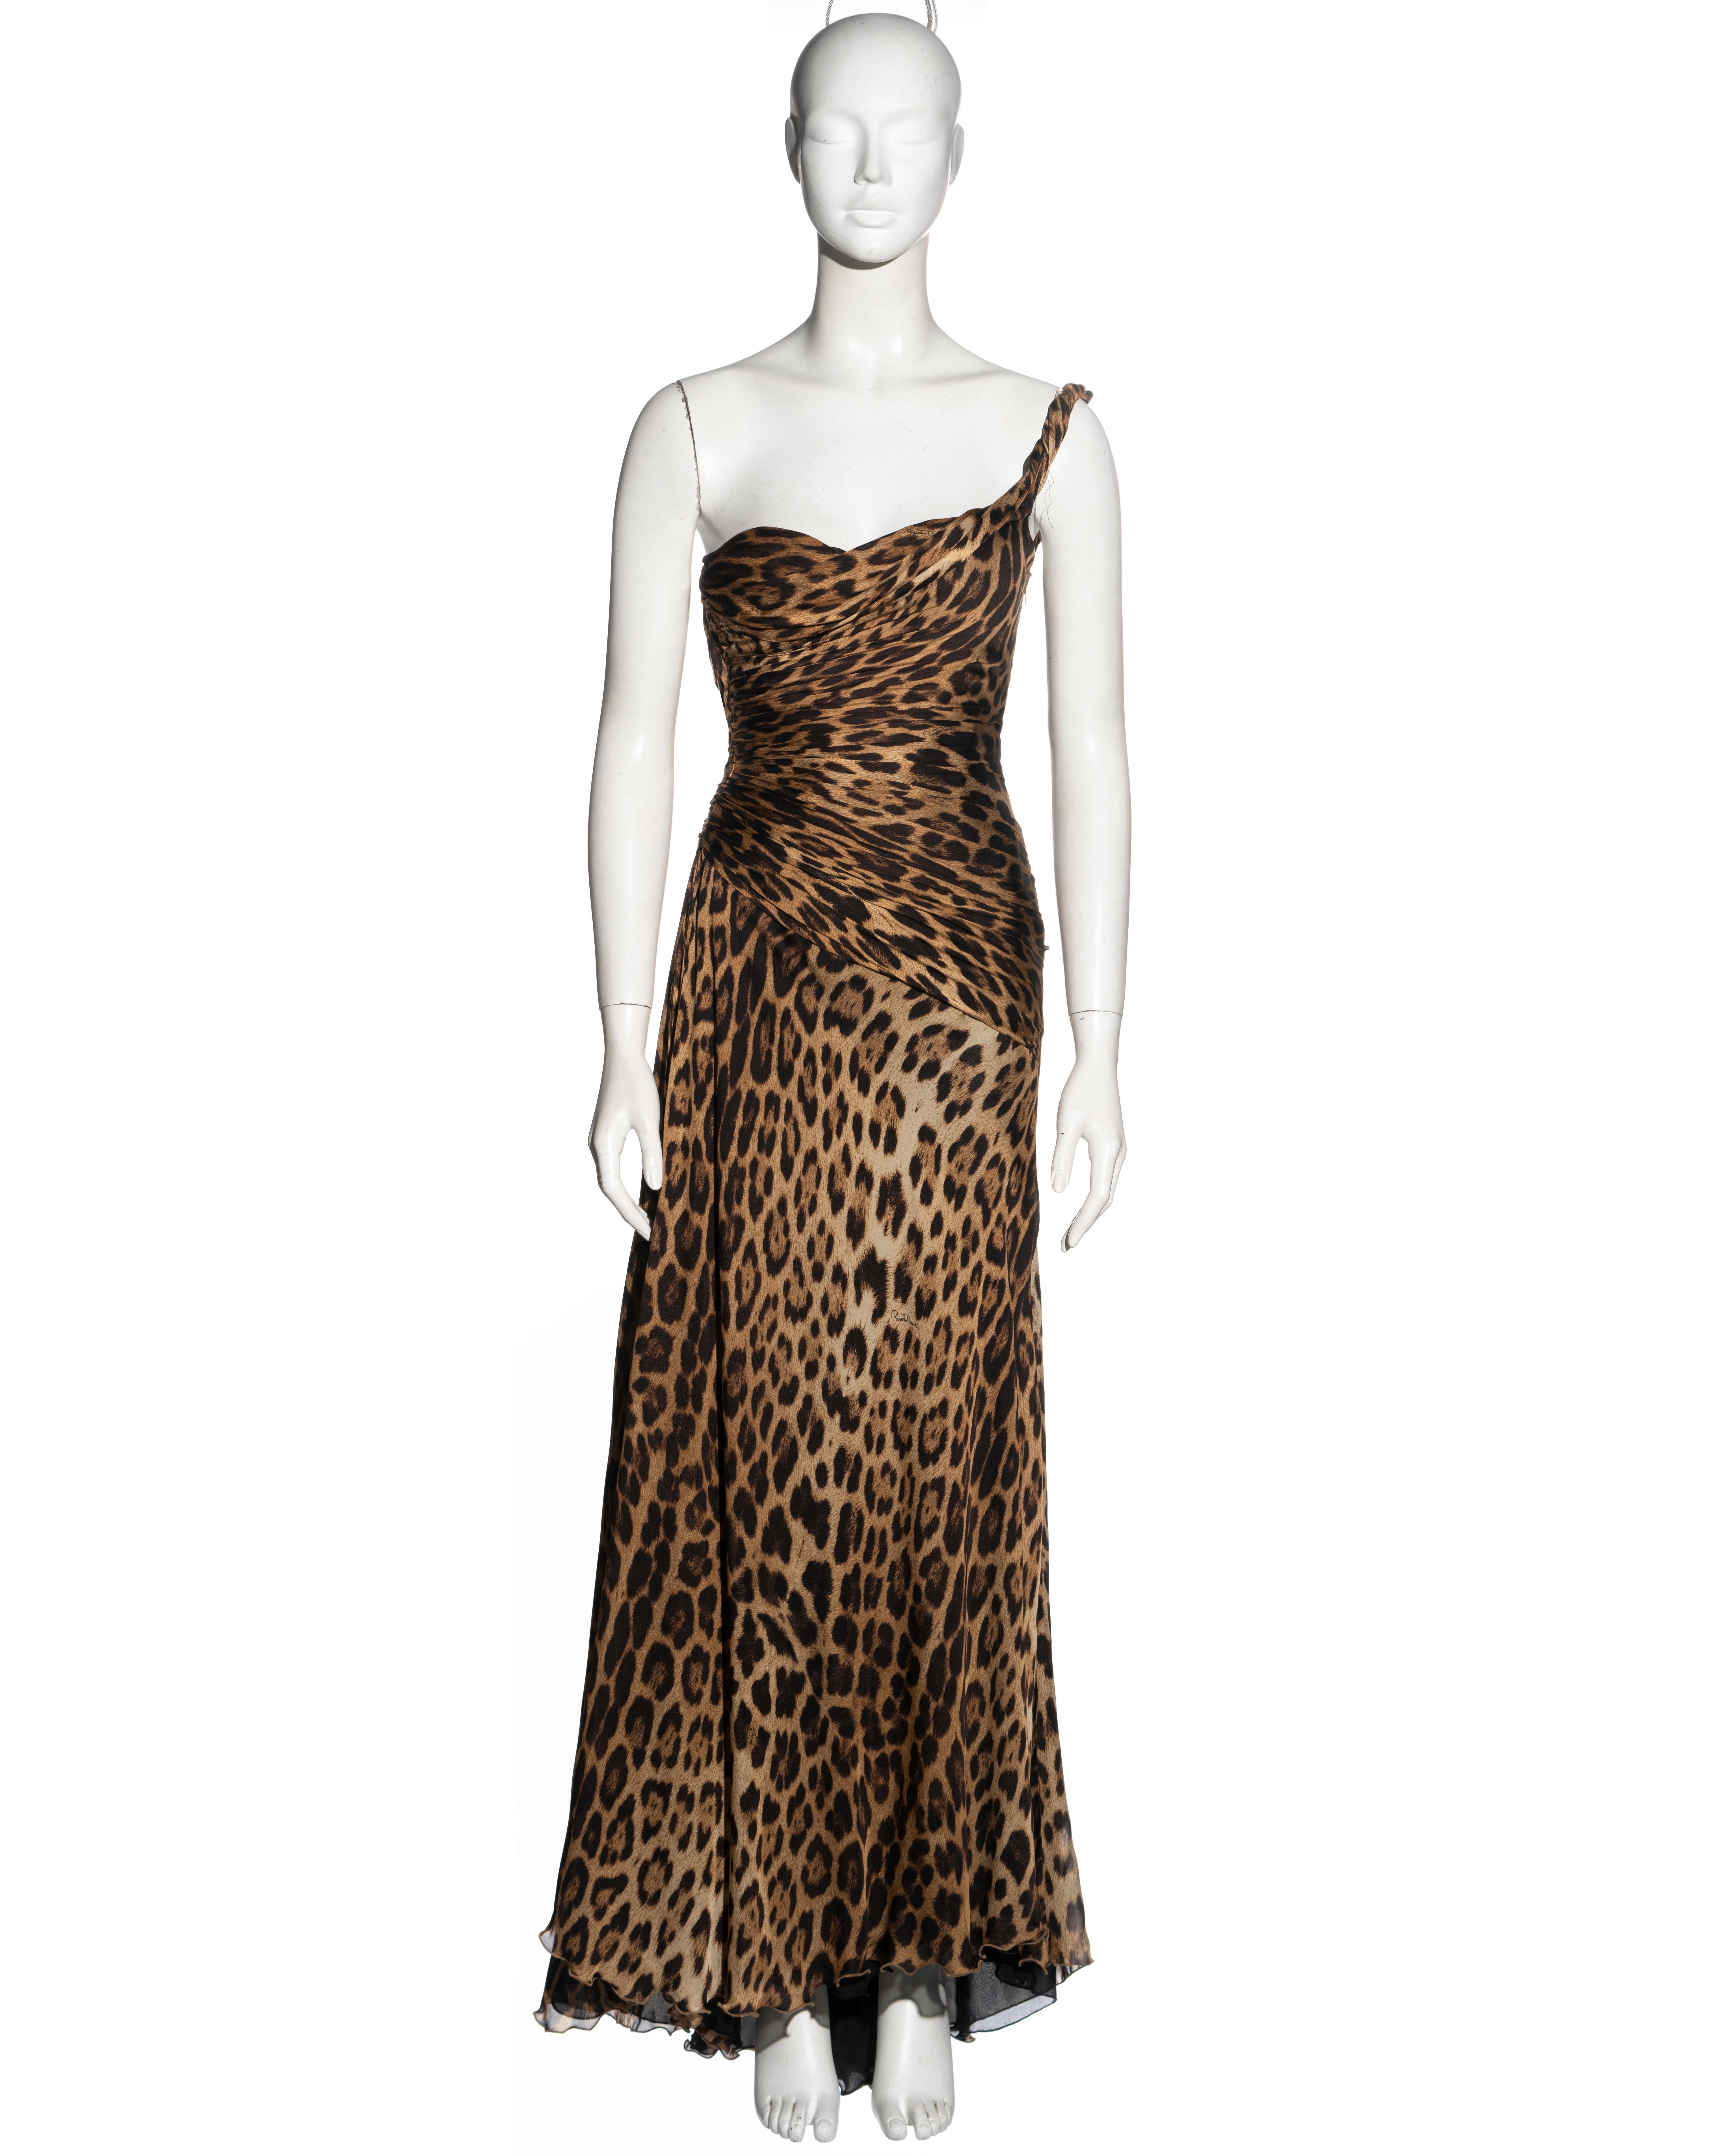 ▪ Roberto Cavalli evening dress
▪ Sold by One of a Kind Archive
▪ Constructed from leopard printed silk 
▪ Bulit-in corset bodysuit 
▪ Pleated bodice with asymmetric draped neckline 
▪ One shoulder strap 
▪ Floor-length skirt with leg slit 
▪ Size: